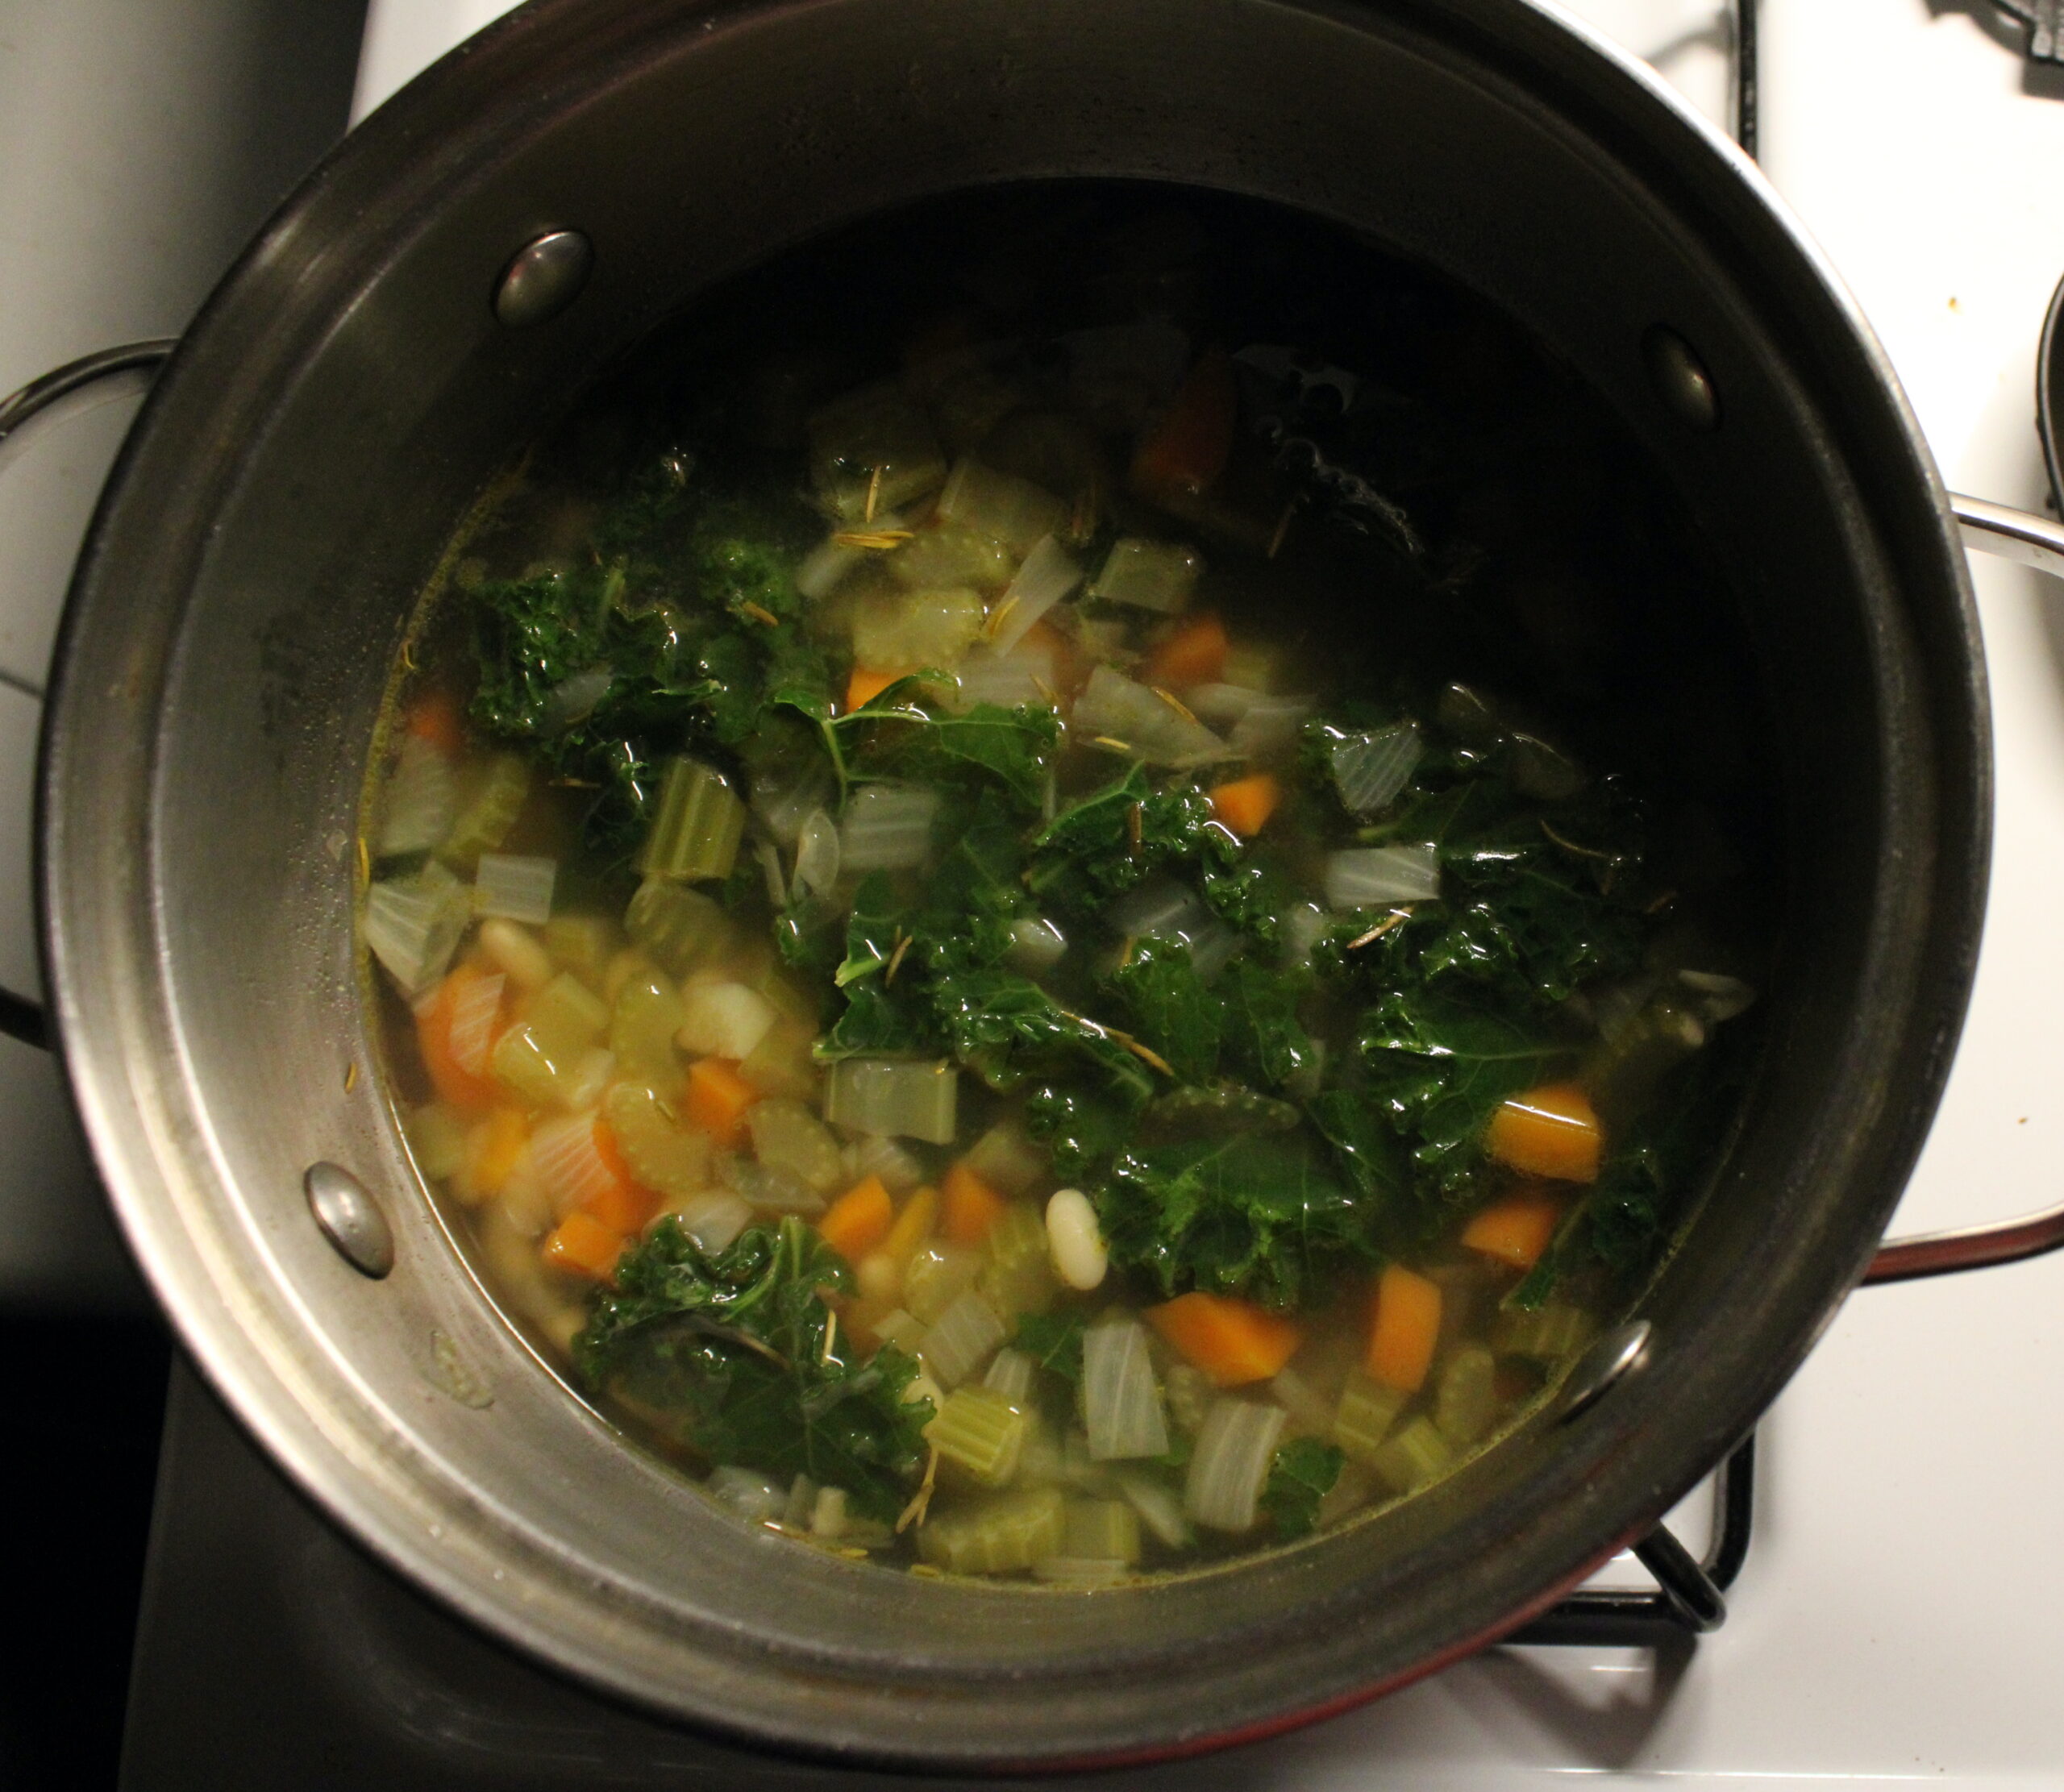 Rosemary & Kale Navy Bean Soup - Hearty at Home Winter Recipes